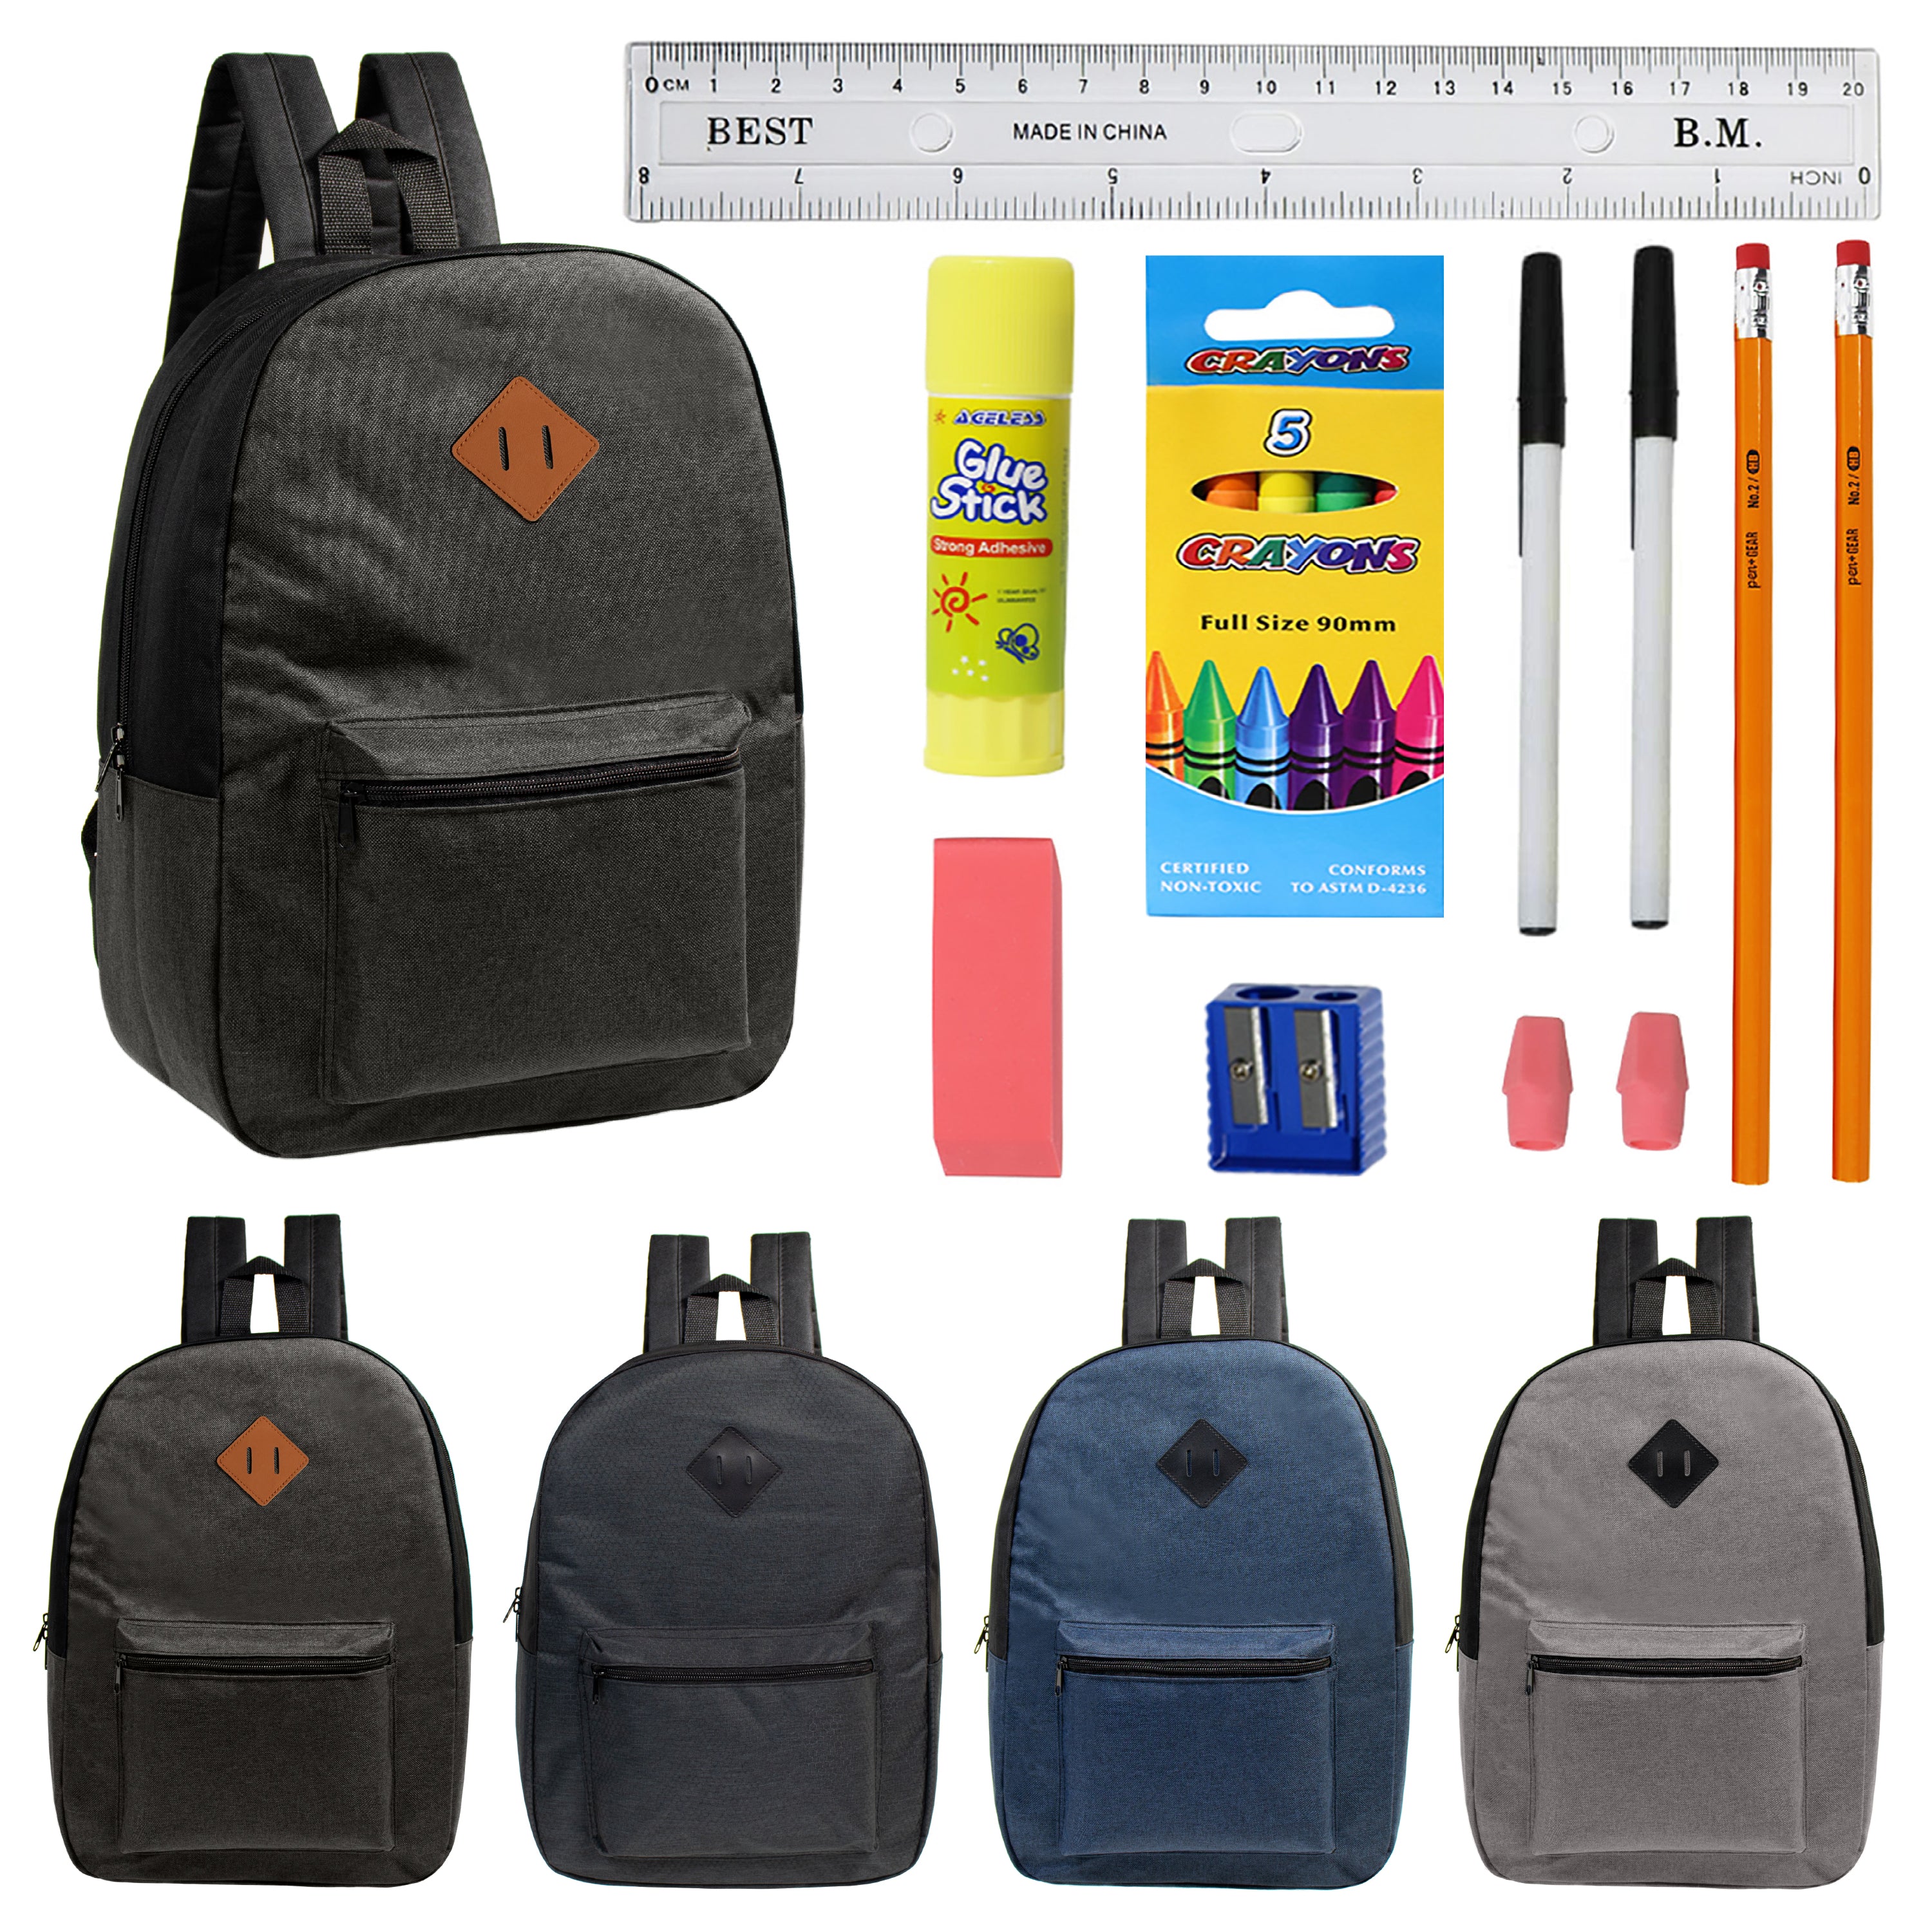 12 Wholesale Diamond Patch Backpacks in 4 Colors & 12 Bulk School Supply Kits of Your Choice